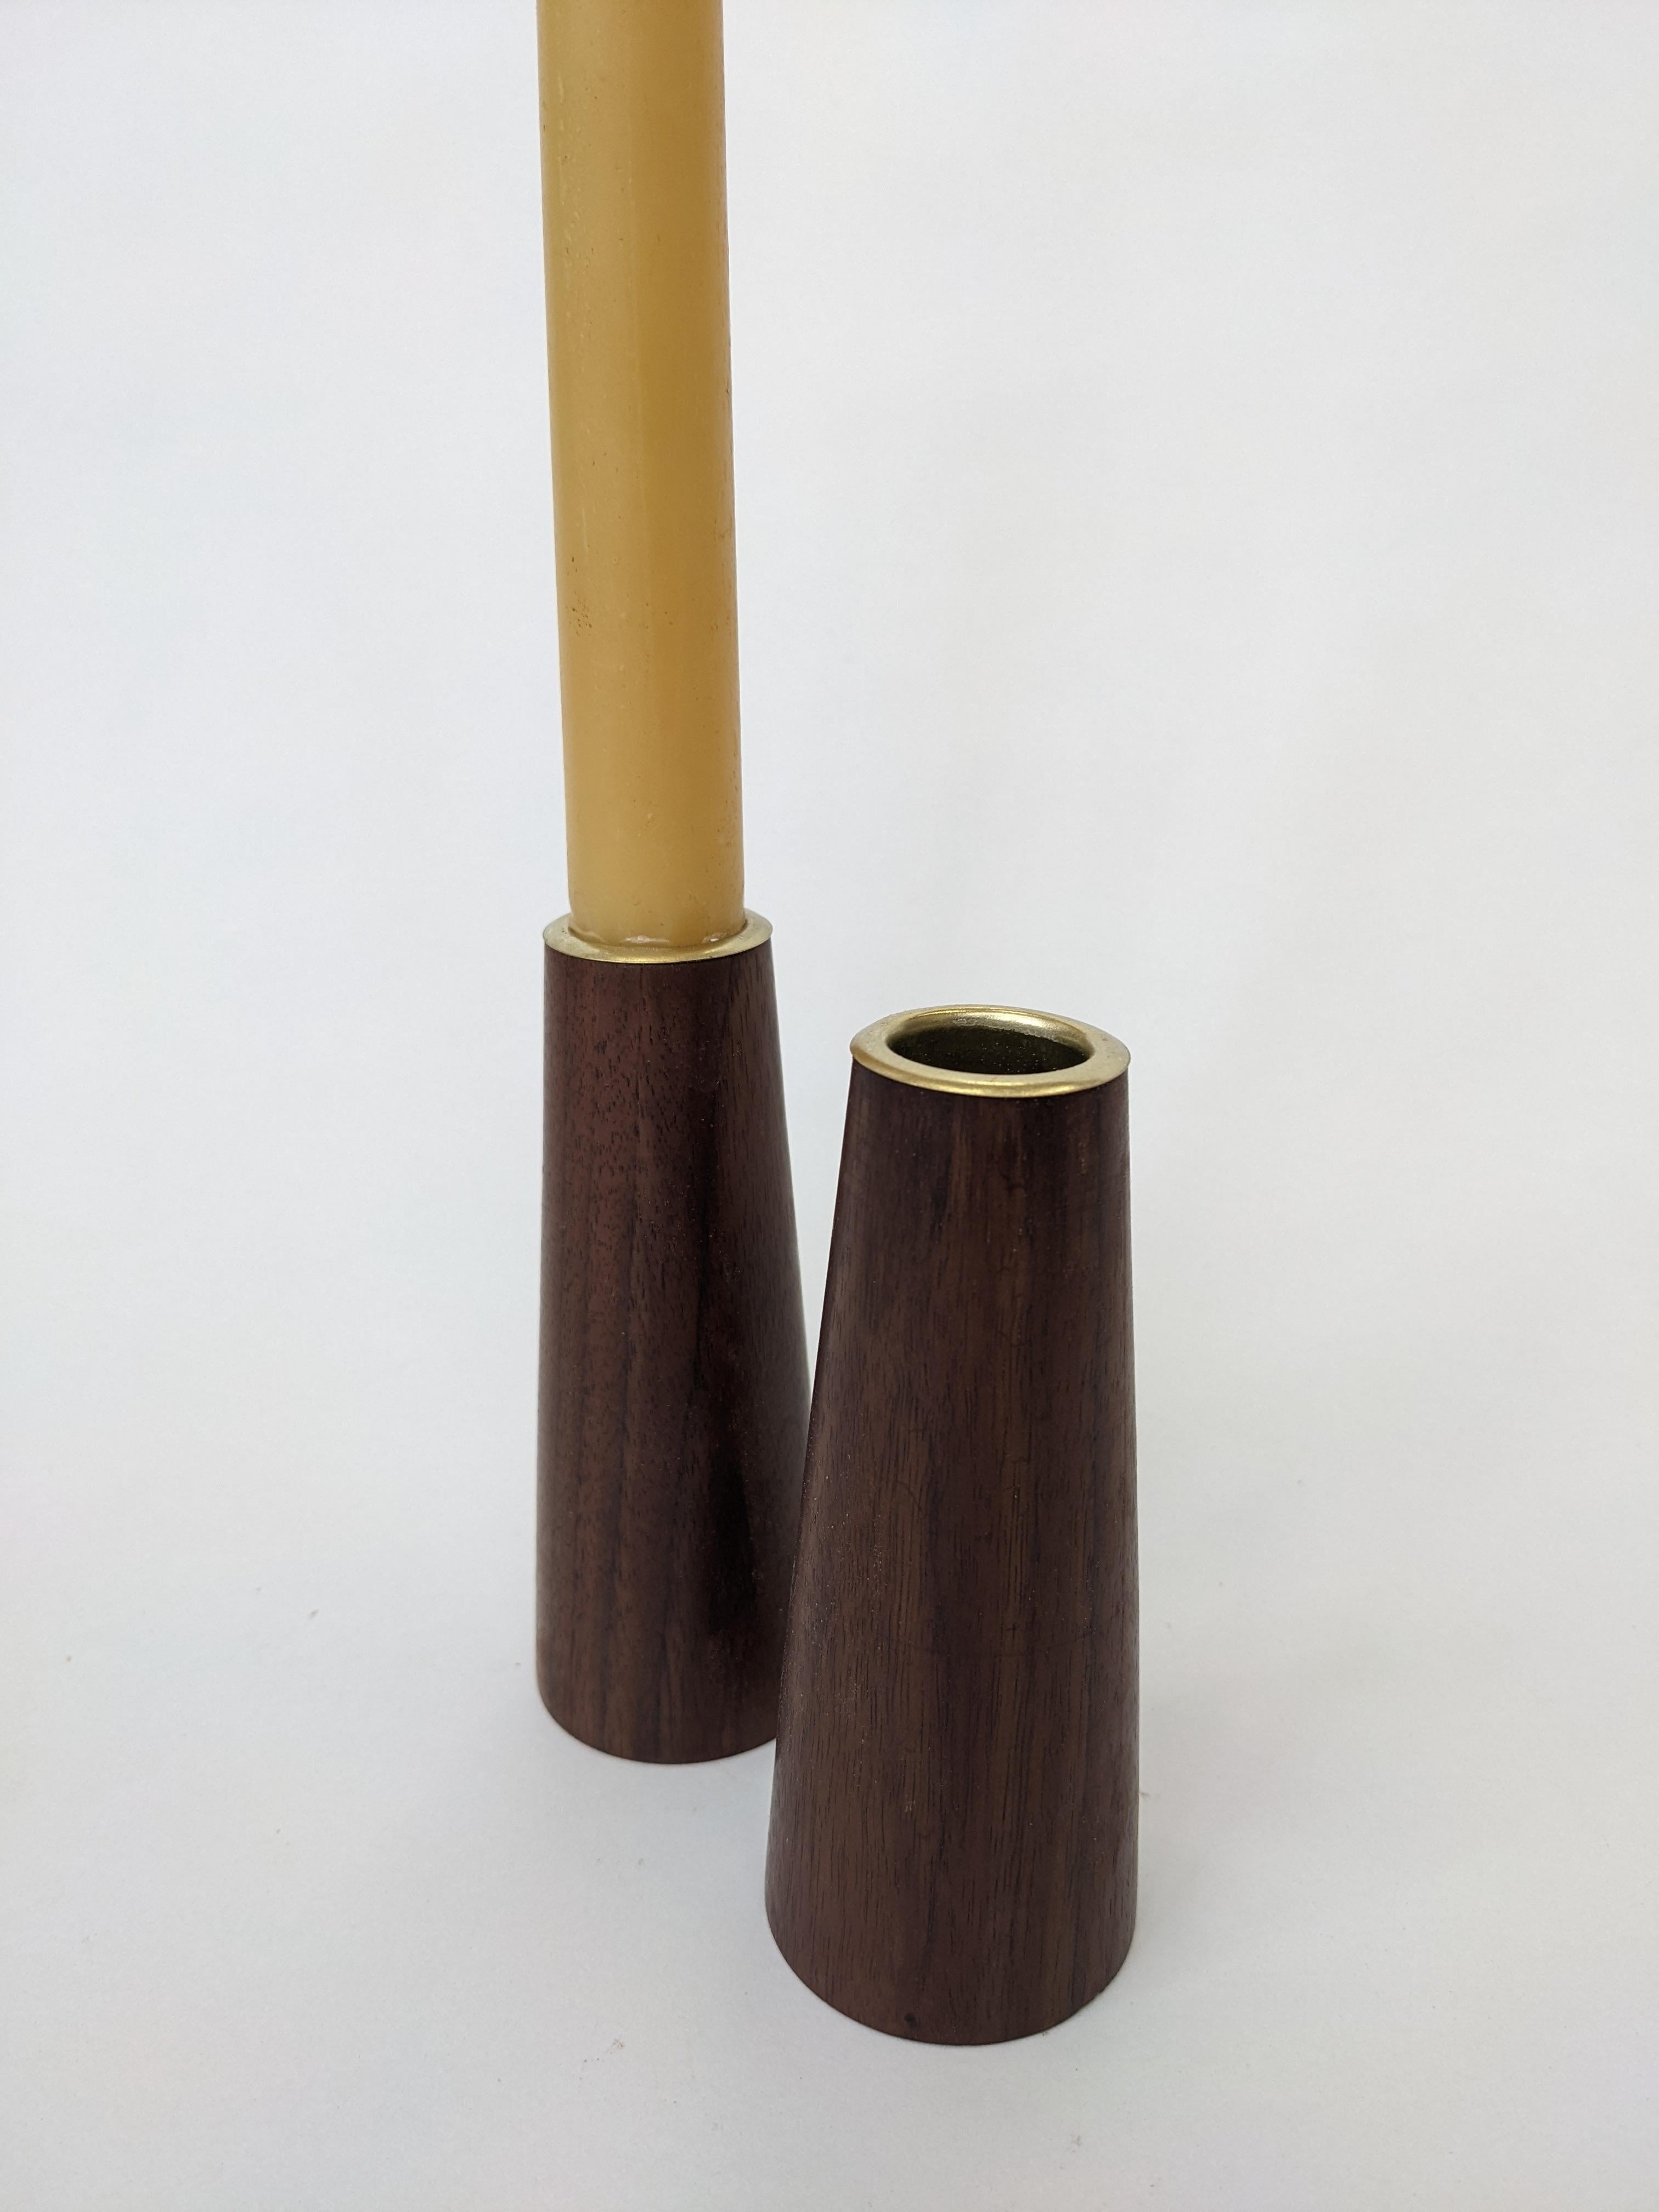 Black Walnut candlesticks with brass ferrules. 
Elegant, hand crafted, perfect for the holiday season, or to warm up any space.

This item is designed by Fuugs and made from salvaged trees, milled by us, dried and crafted into furniture by hand in